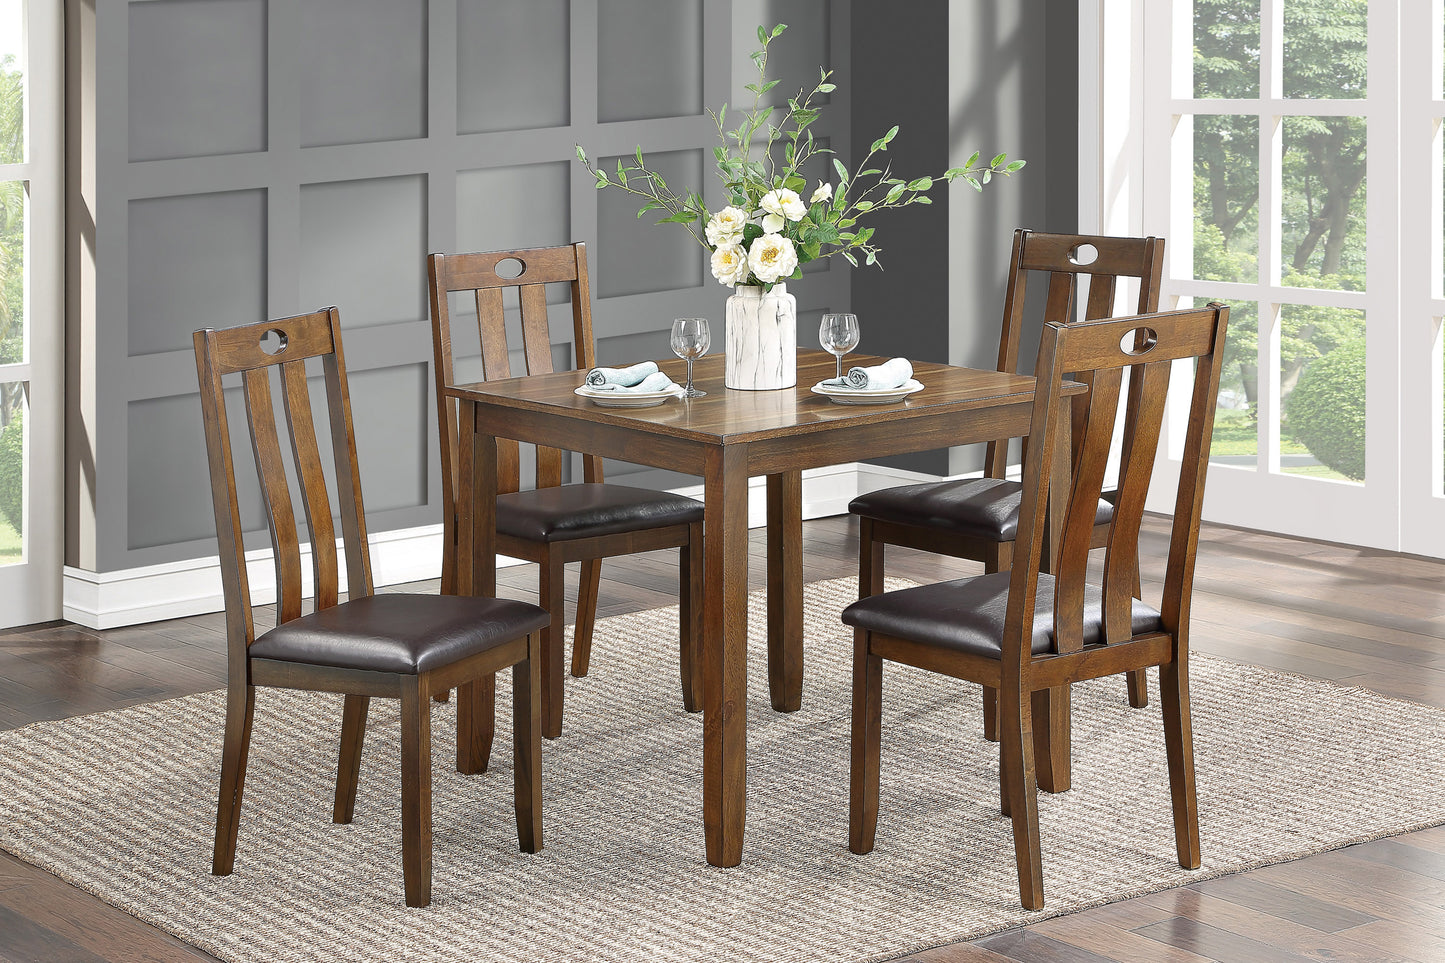 Weston 5PC Dinette Set SOLD IN SET ONLY